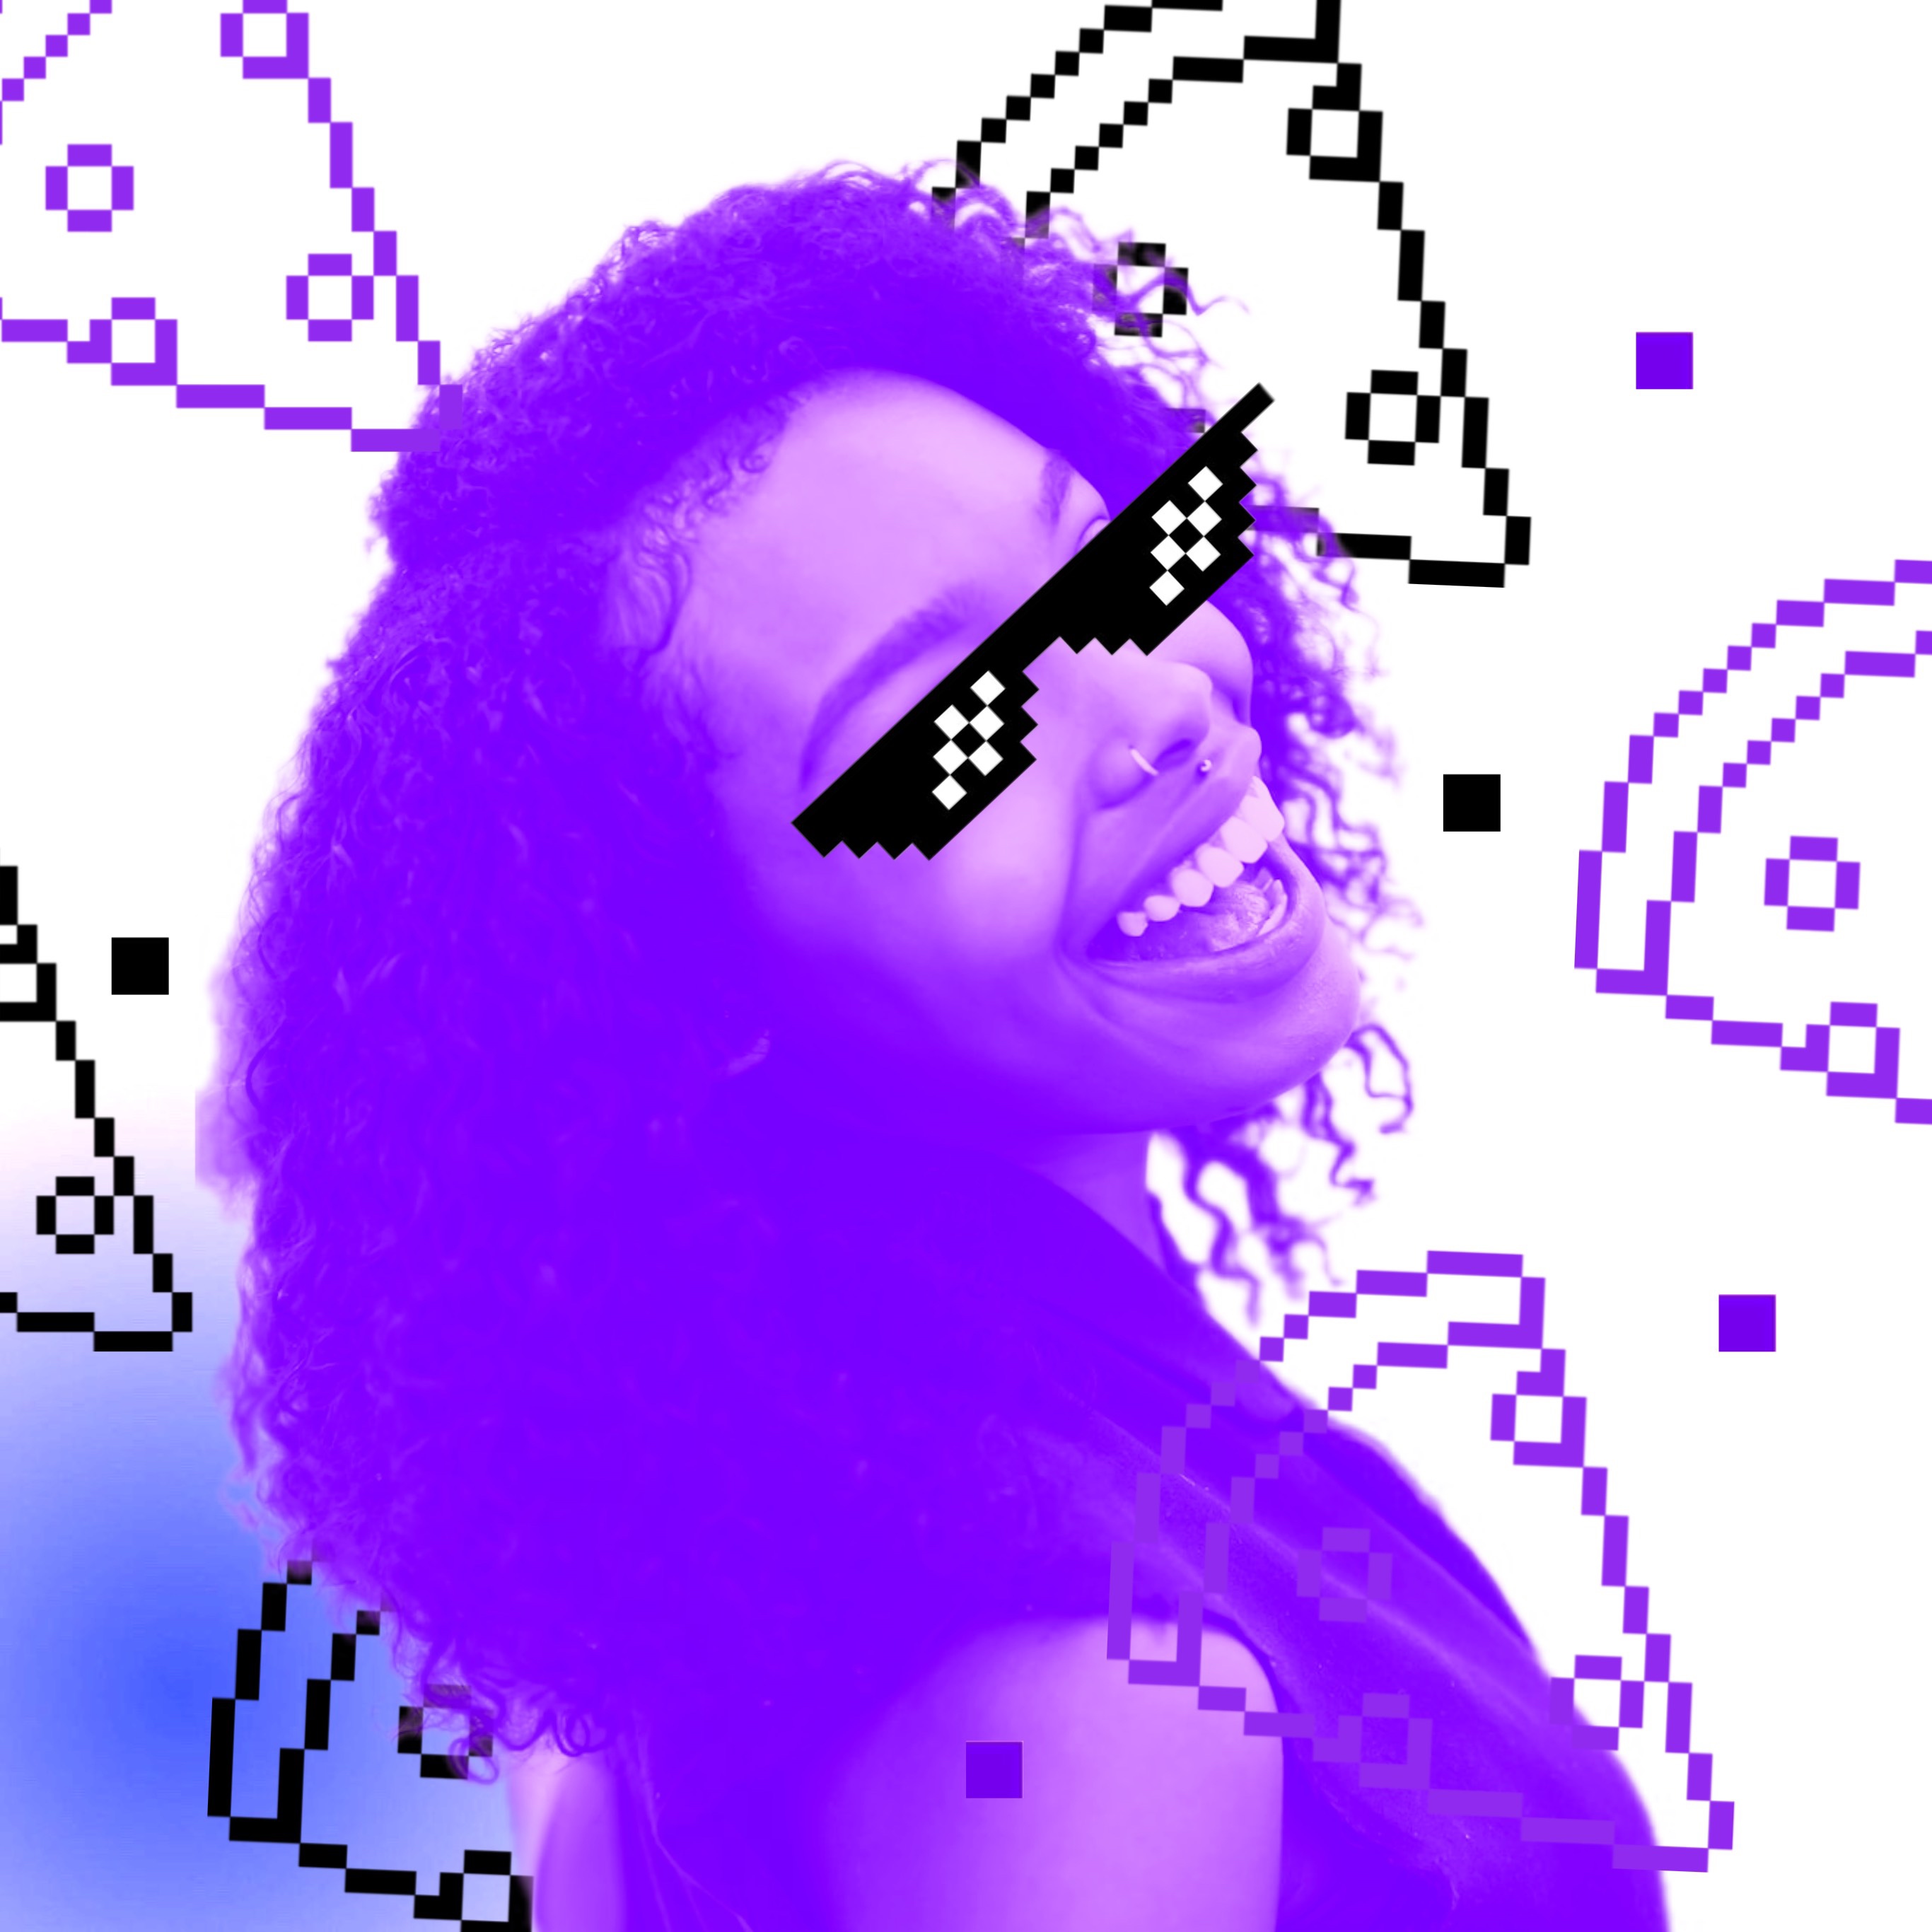 Profile Pic Of a Woman old Computer style, sunglasses, Purple